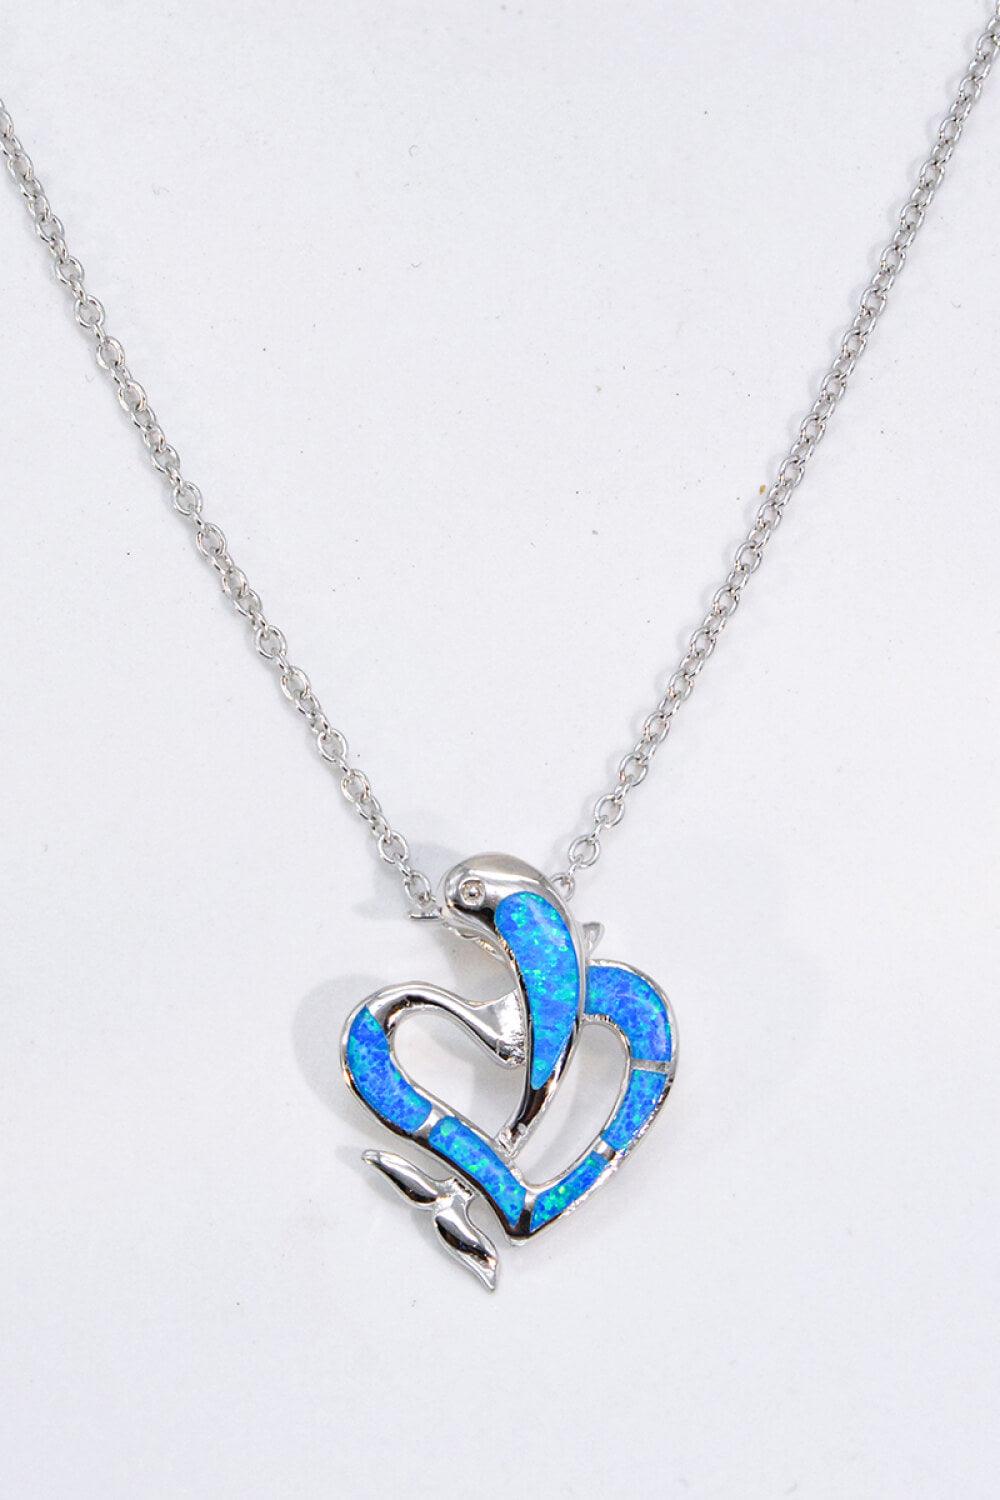 Opal Dolphin Heart Chain-Link Necklace - Flyclothing LLC